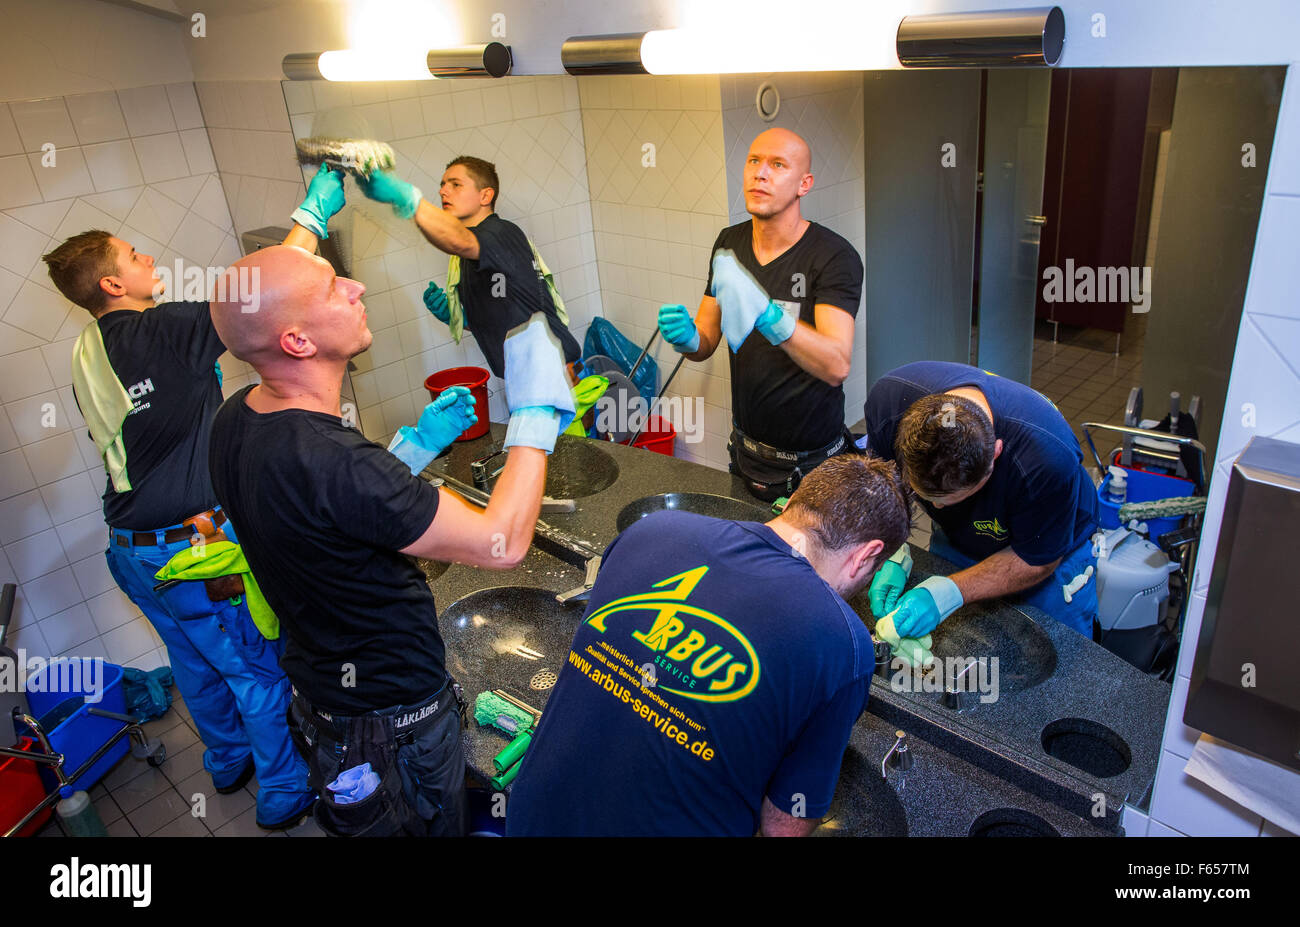 Schwerin, Germany. 12th Nov, 2015. Building cleaners Angelo Scholz (C), Alexandru Florin Lungu (R), and Nico Wiegmann clean the public toilets during the national competition of building cleaner apprentices at the Mecklenburg State Theater in Schwerin, Germany, 12 November 2015. The young contestants took turns cleaning the floors of the foyer, restrooms, and outside windows of the theater. The aim of the annual competition is to support apprentices in their career development and to motivate high performance. Photo: JENS BUETTNER/dpa/Alamy Live News Stock Photo